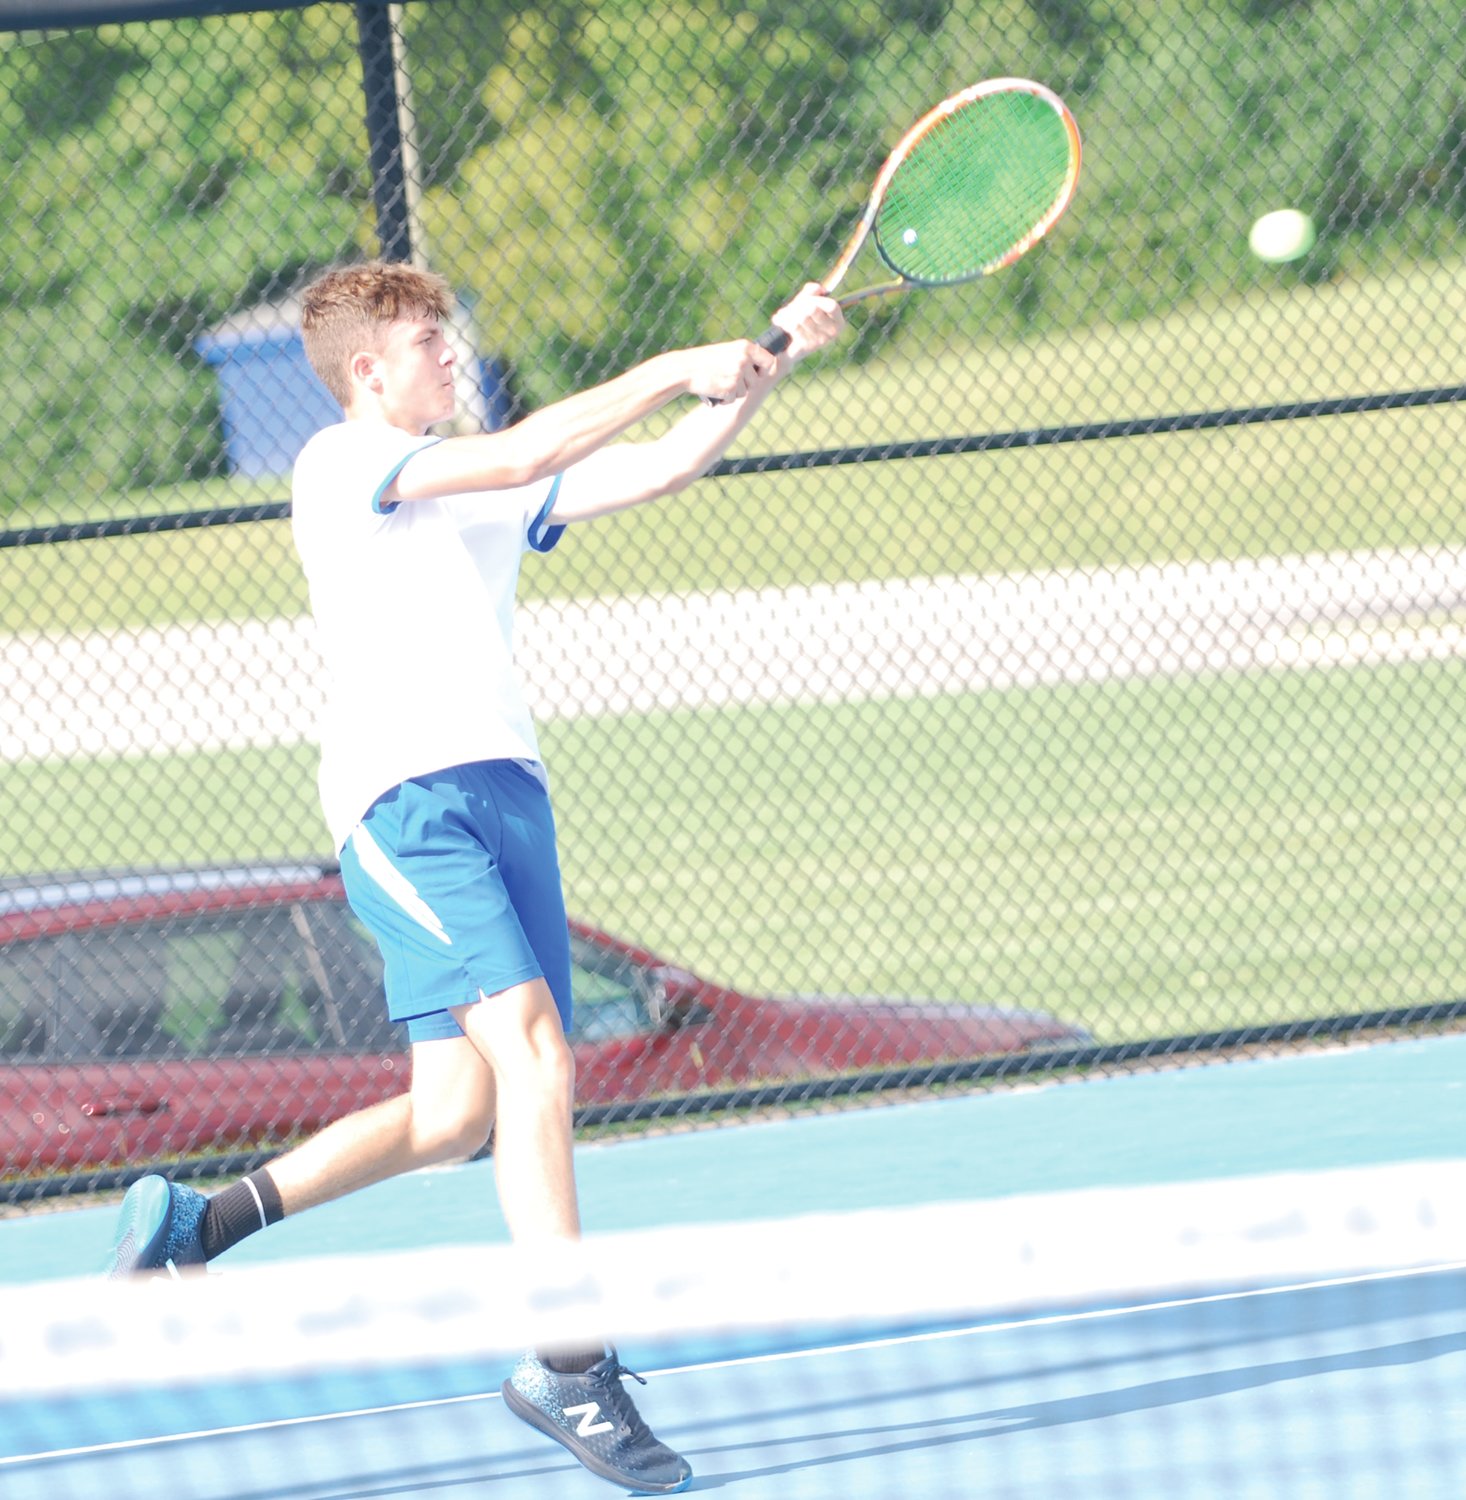 Crawfordsville No. 1 singles player Austin Motz returns a shot against Fountain Central's Cody Linville on Tuesday night.